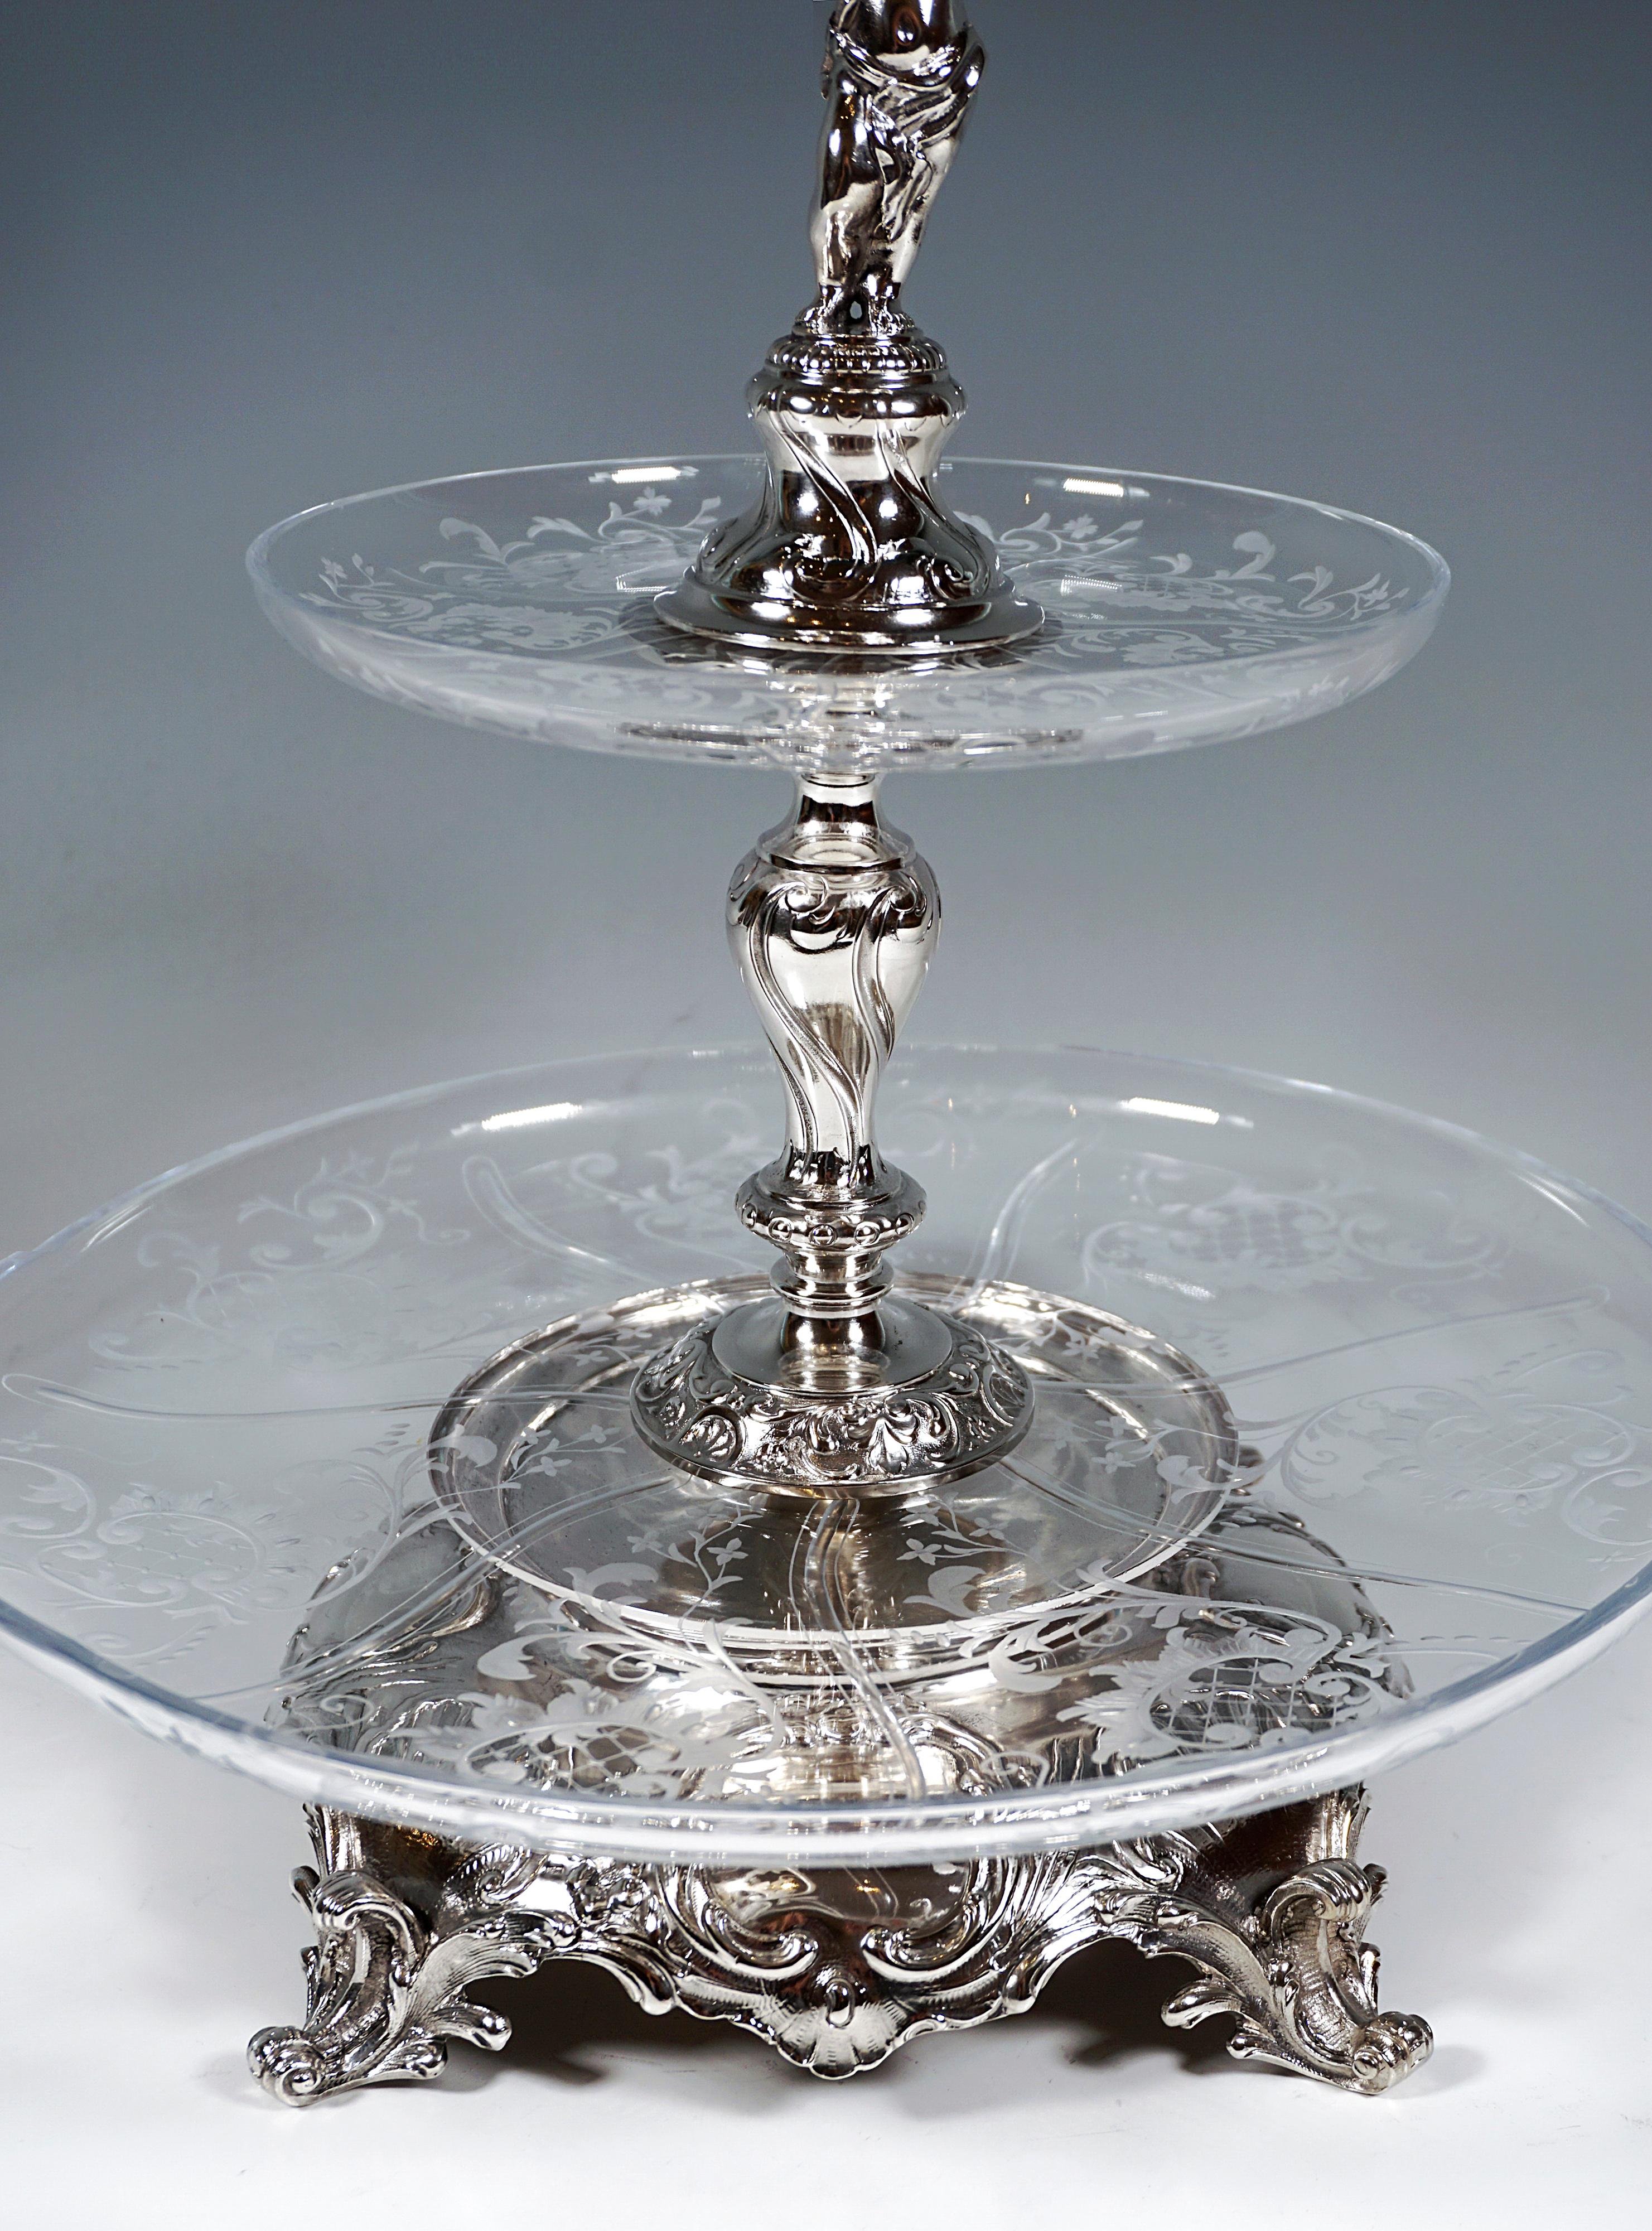 Hand-Crafted Viennese Silver & Glass Art Nouveau Table Étagère by Würbel & Szokally, Ca. 1900 For Sale